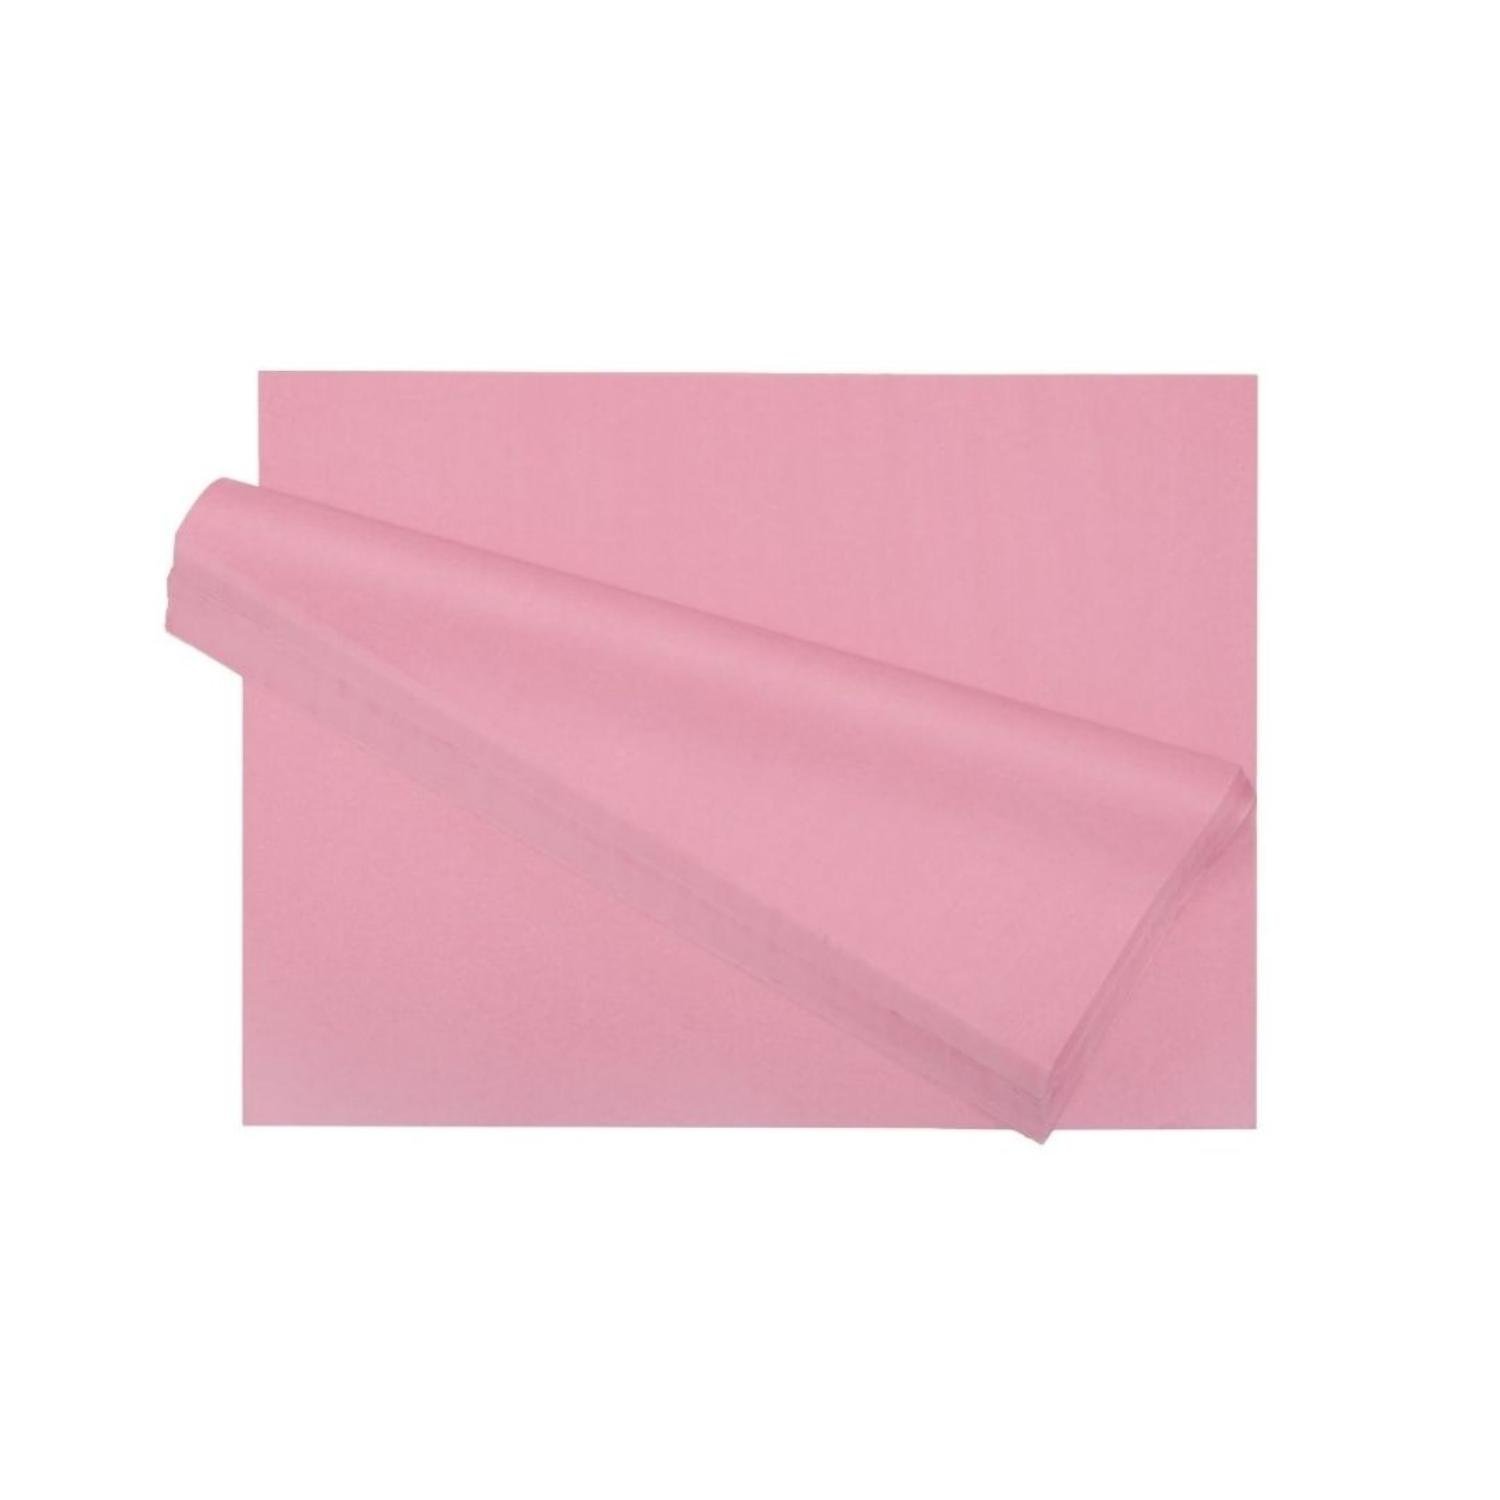 PINK TISSUE REAM 15" X 20" - 480 SHEETS